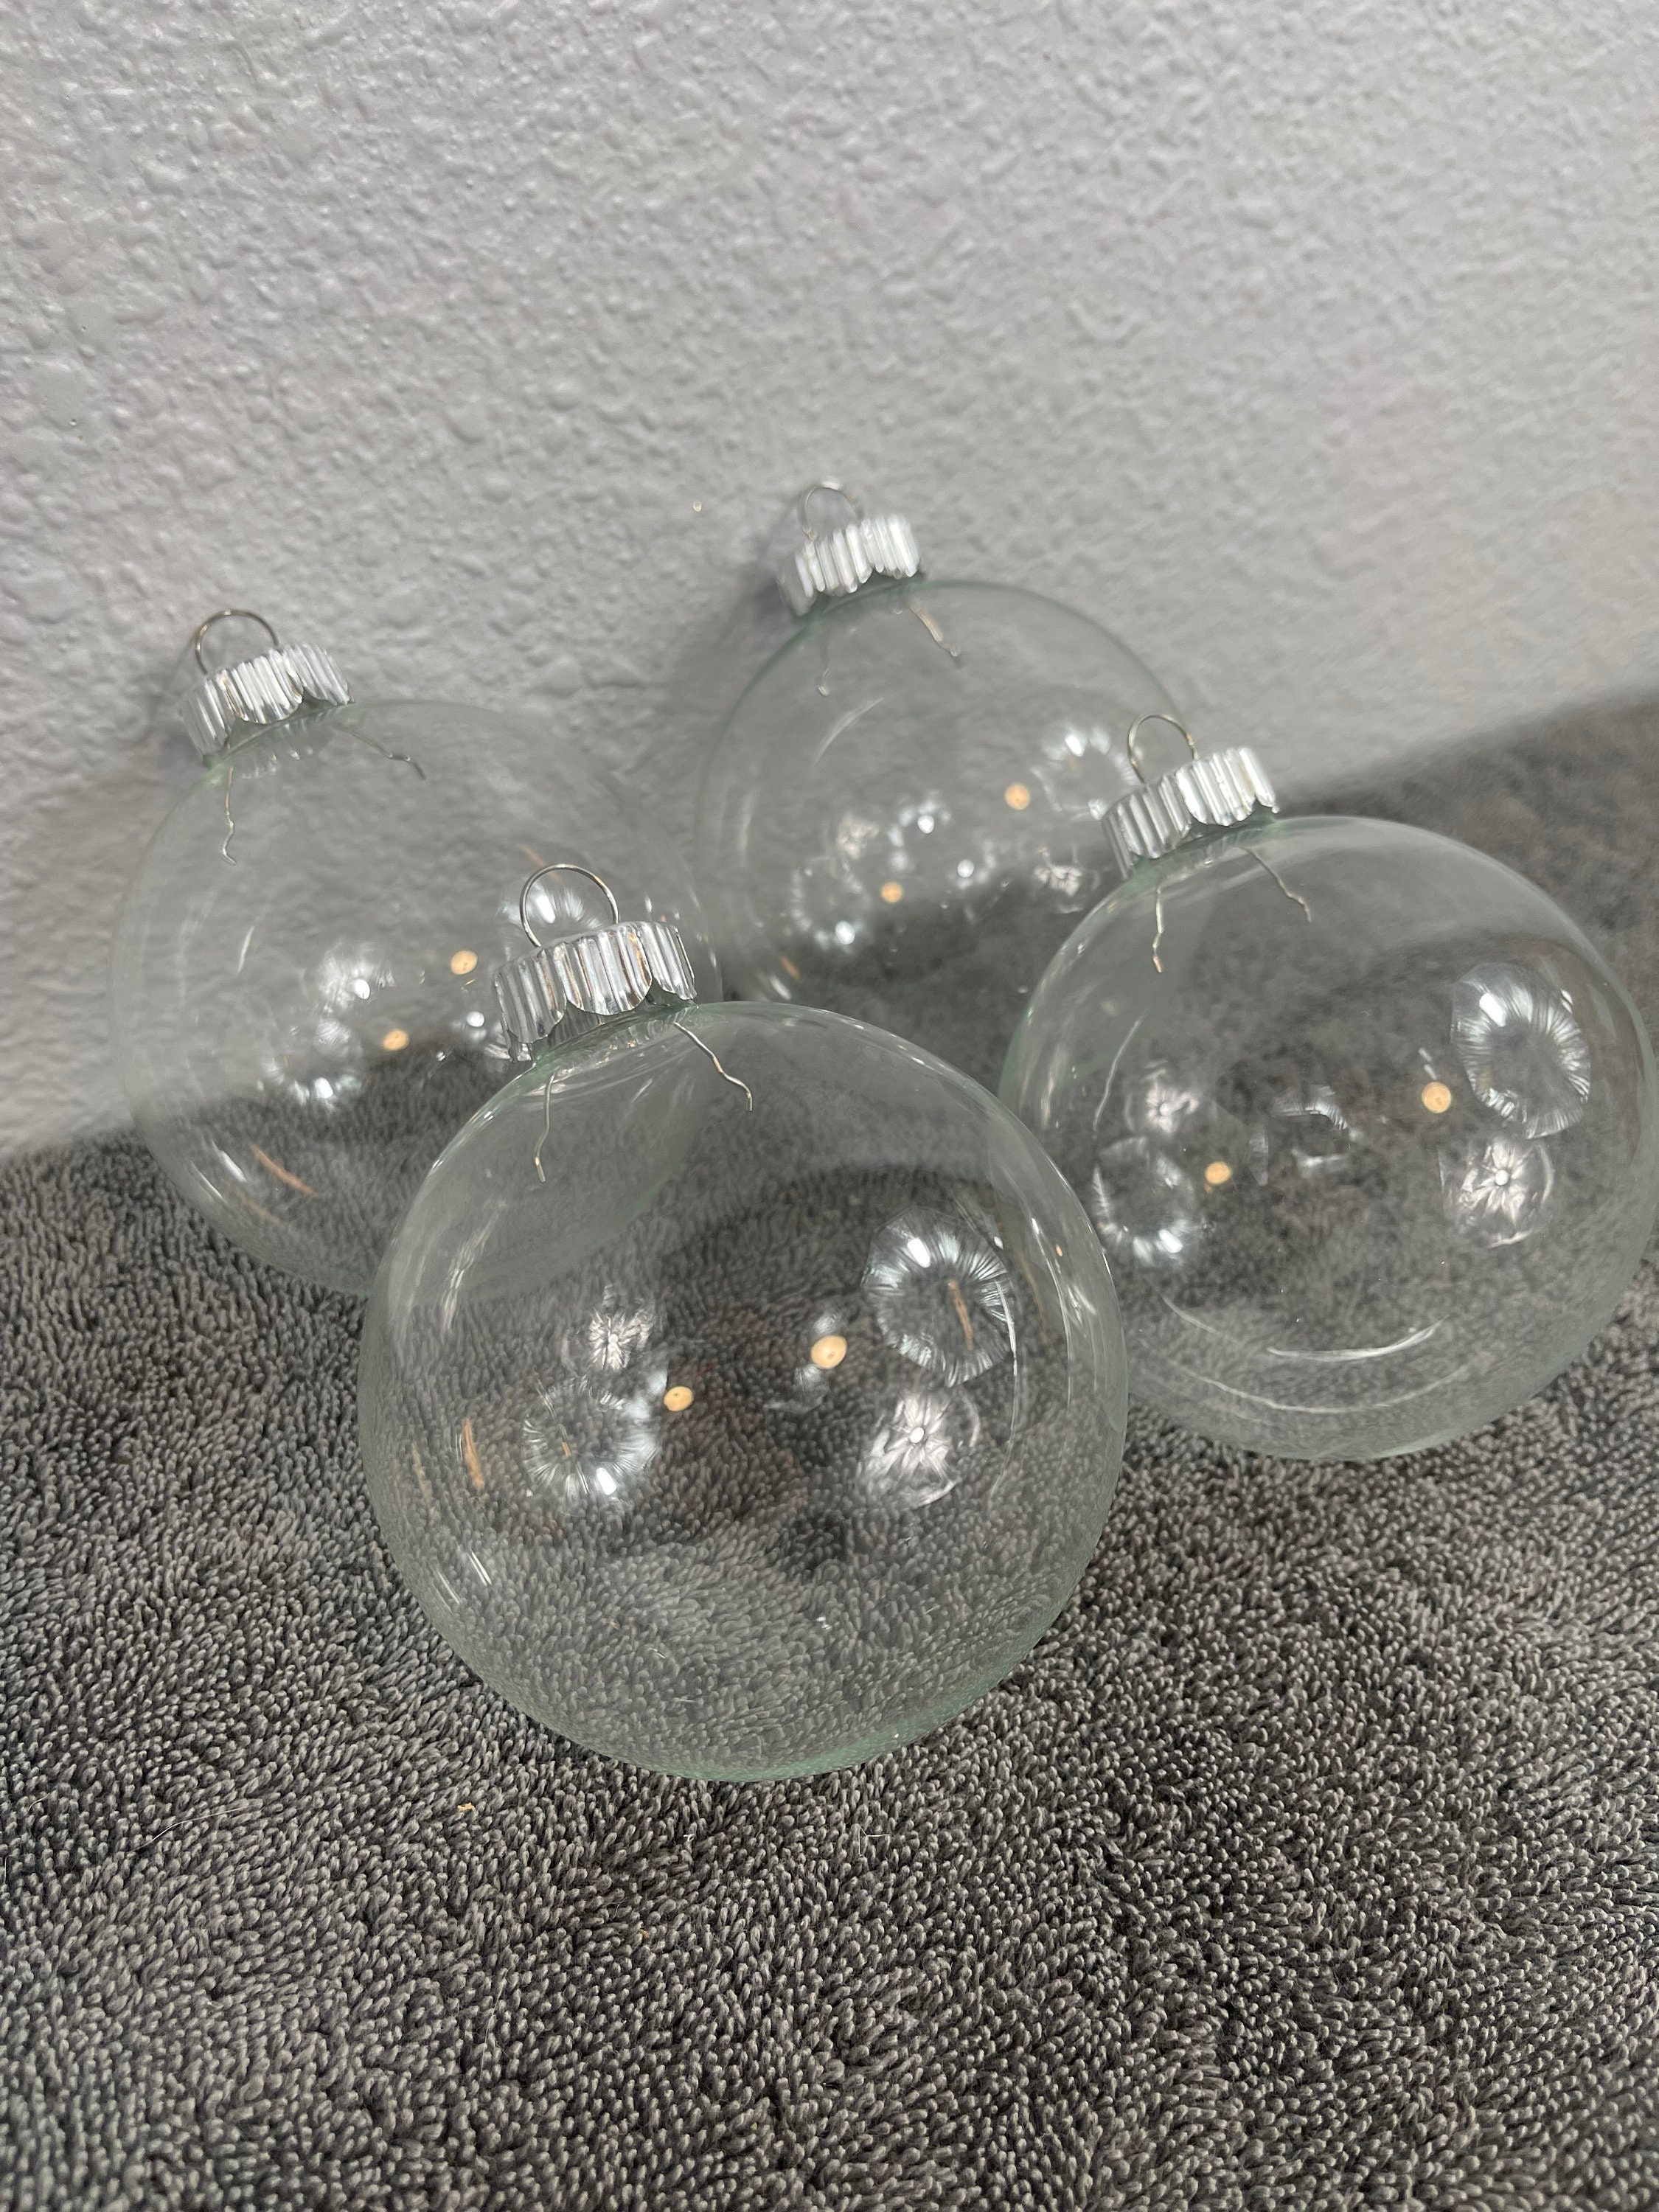 3 (76mm) Glass Disc Ornaments, Clear with Silver Crown Caps, 3